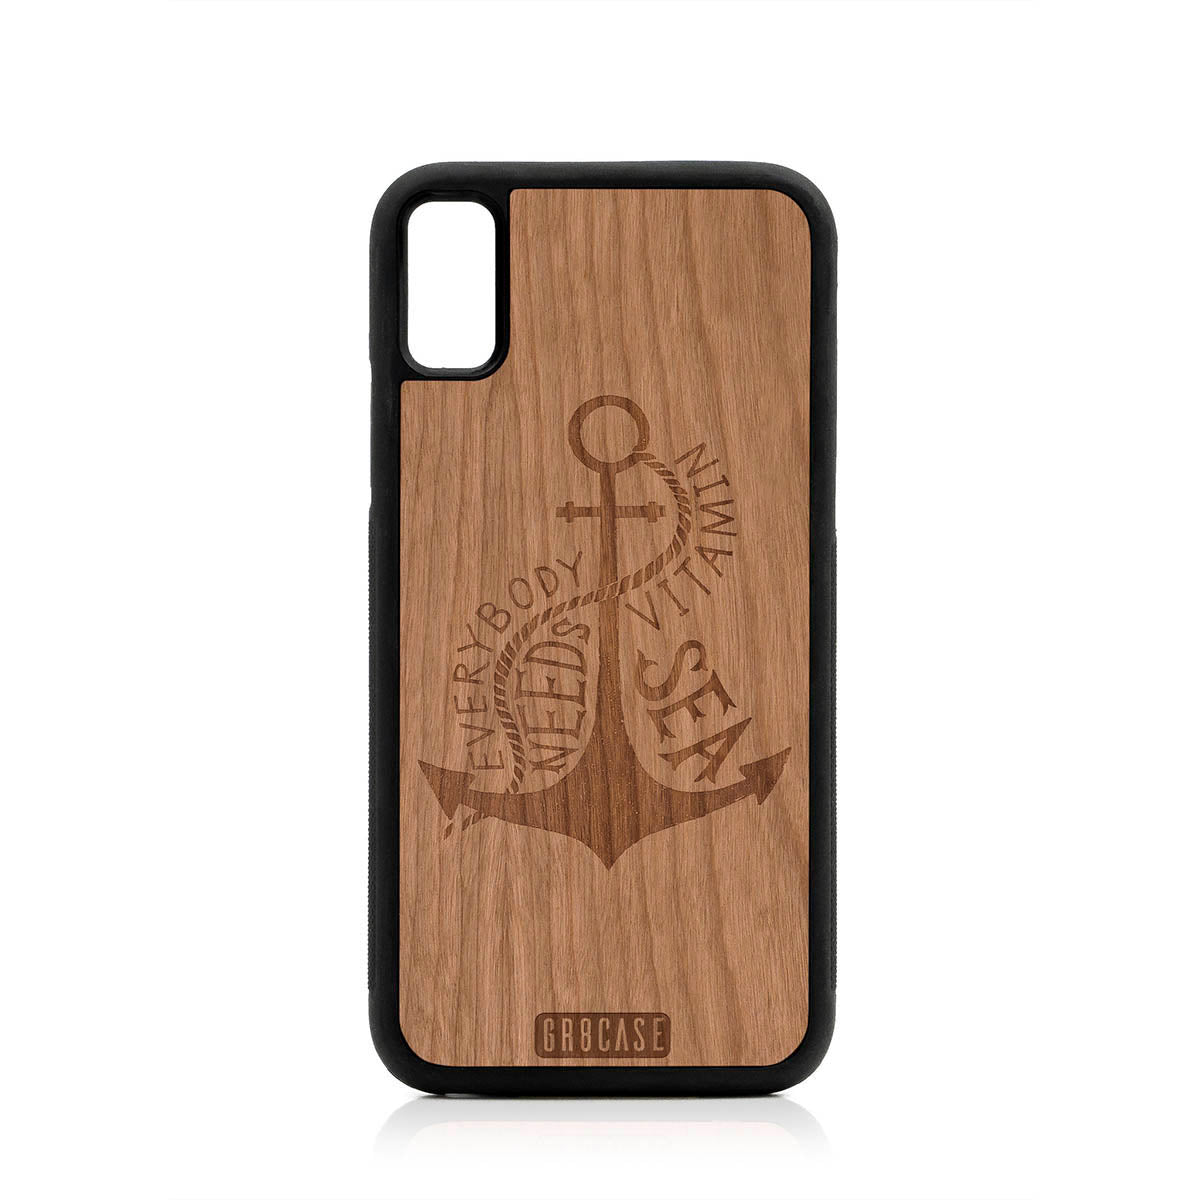 Everybody Needs Vitamin Sea (Anchor) Design Wood Case For iPhone X/XS by GR8CASE